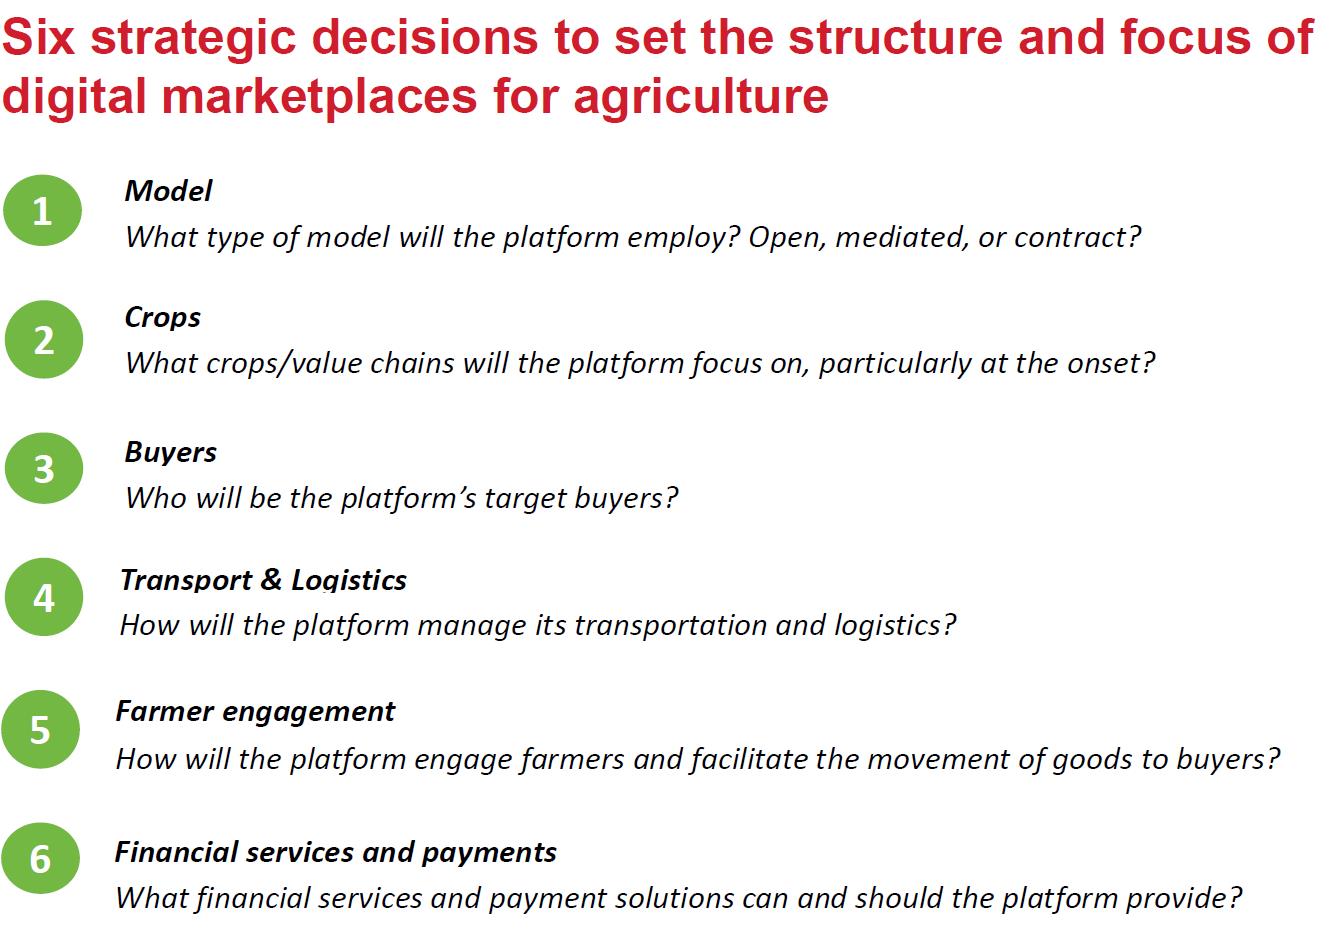 Six strategic decisions to set the structure and focus of digital marketplaces for agriculture